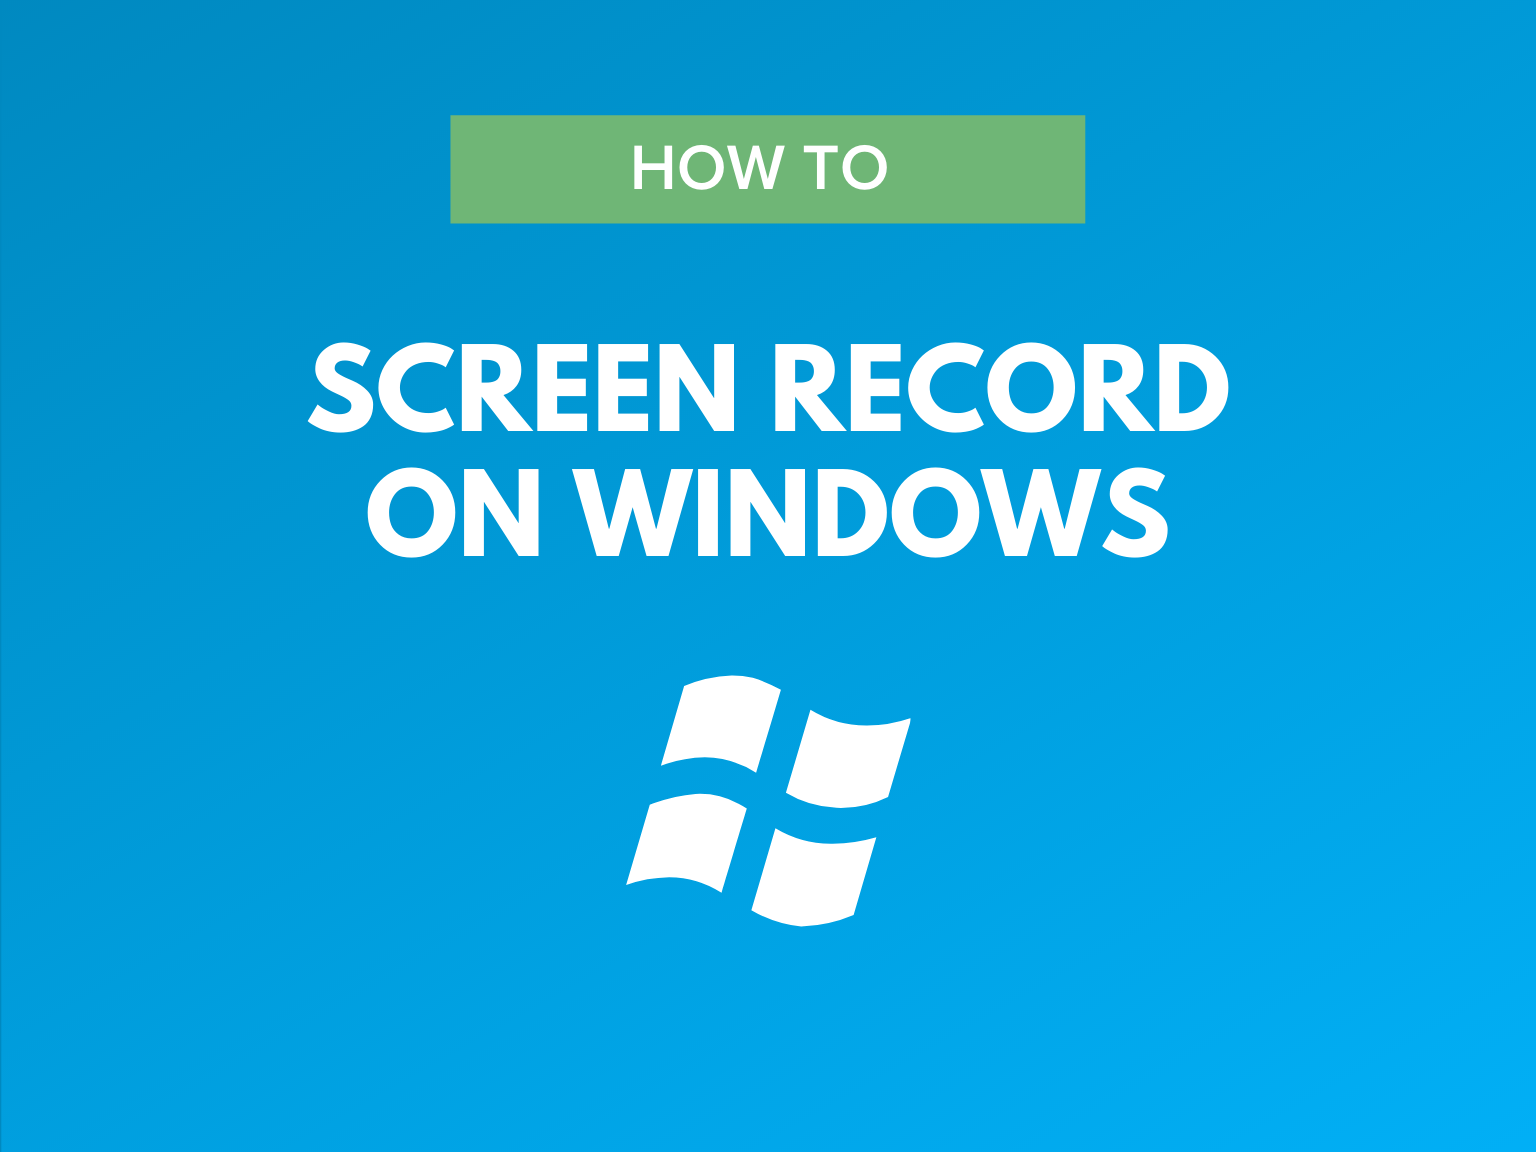 How to Screen Record on Windows